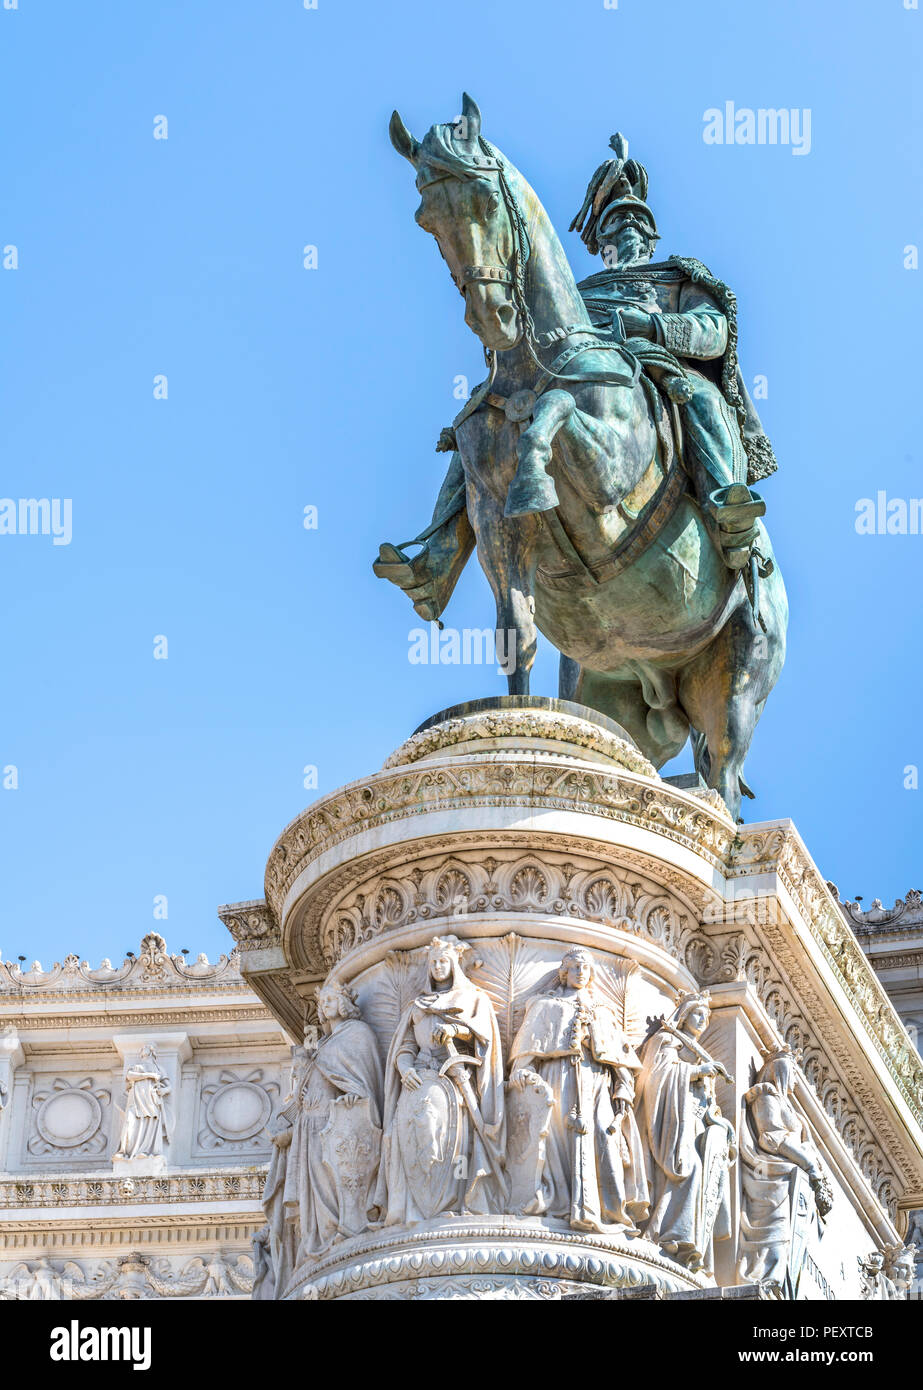 At the Capitoline Hill in Rome Stock Photo